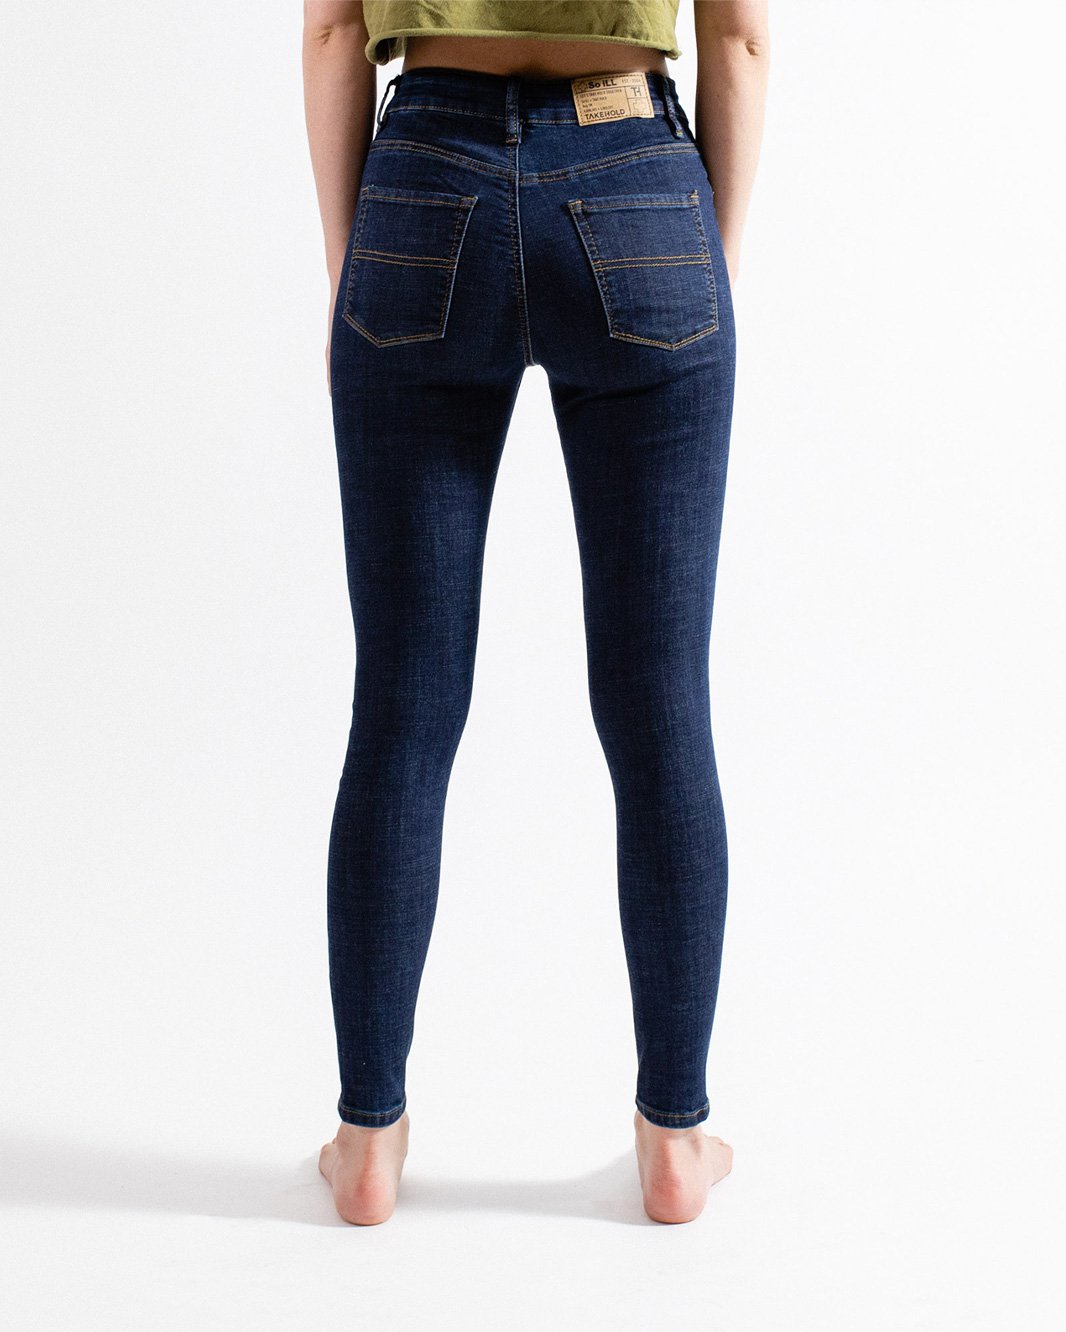 A Review: American Apparel- Easy Jeans and Disco Pants (Comparison